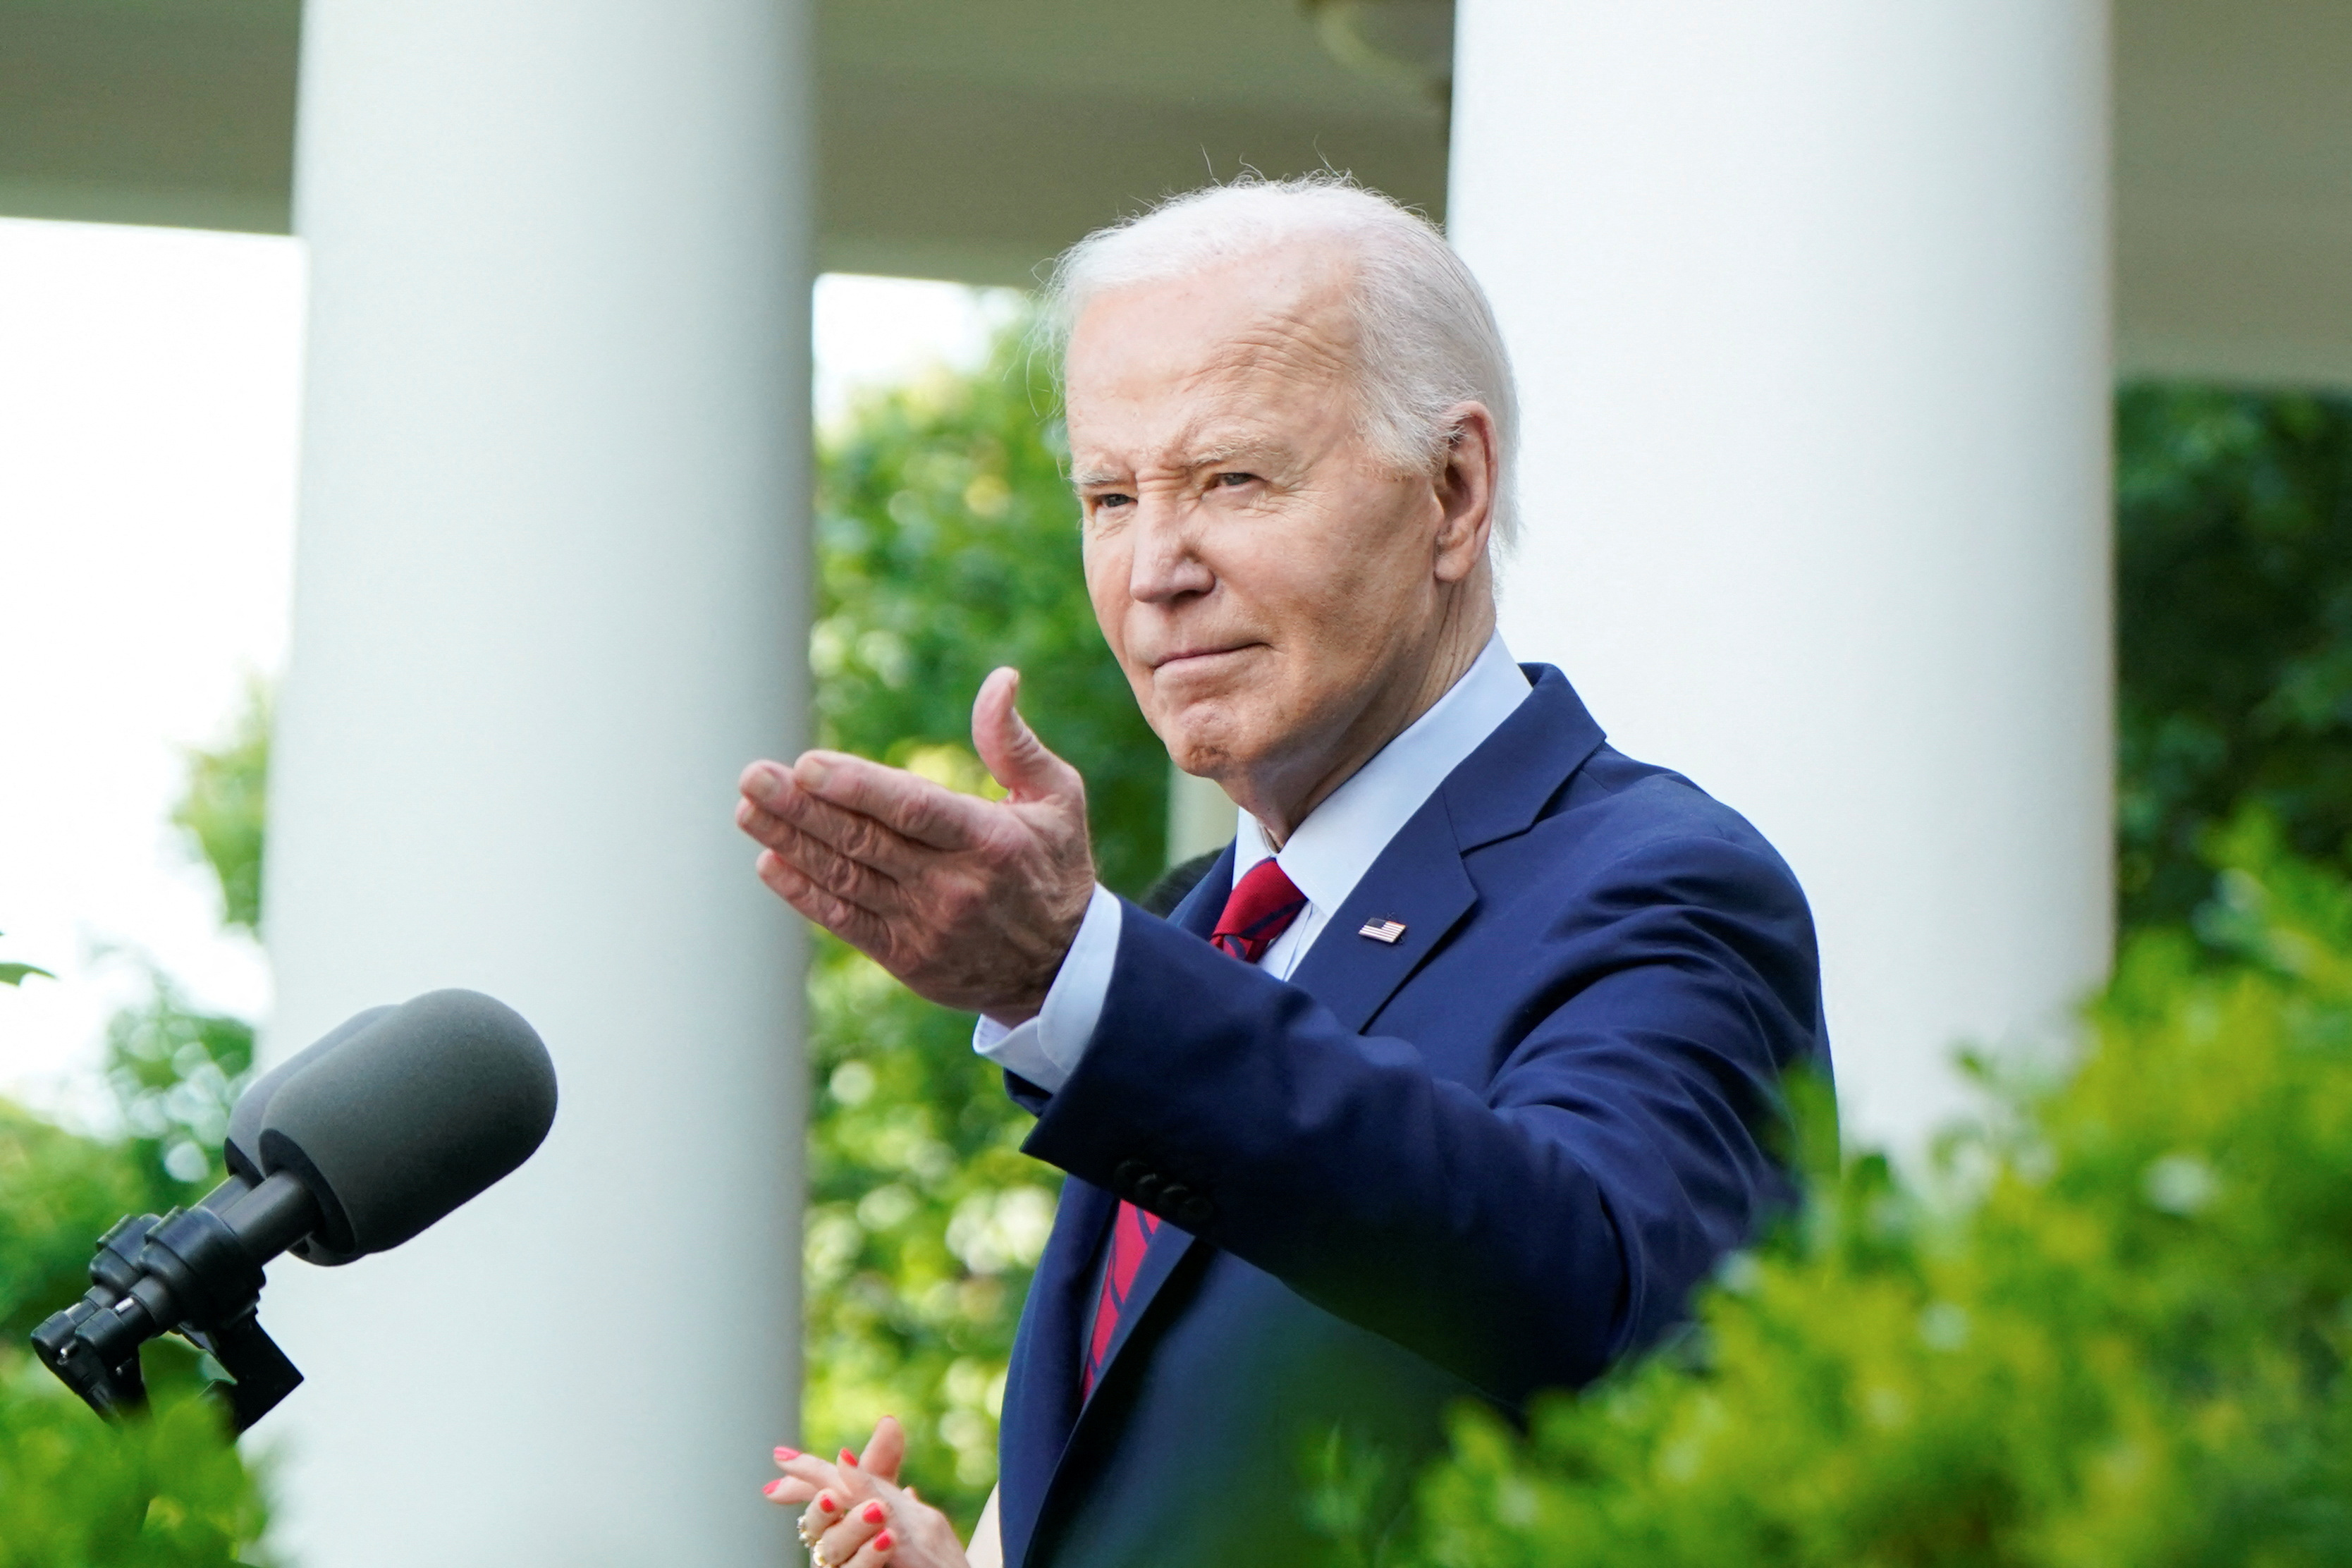 U.S. President Biden delivers remarks at reception celebrating Asian American, Native Hawaiian, and Pacific Islander Heritage Month, at the White House